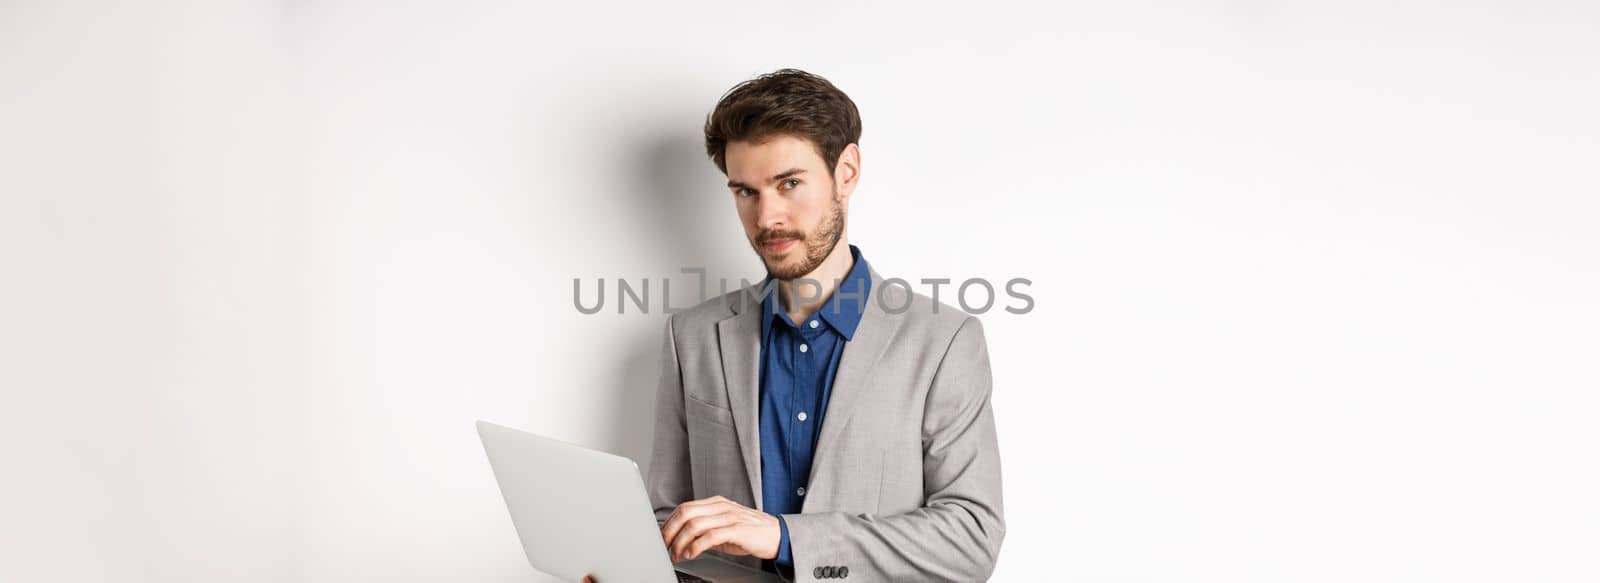 Handsome businessman in suit working on laptop, looking at camera confident, standing against white background.